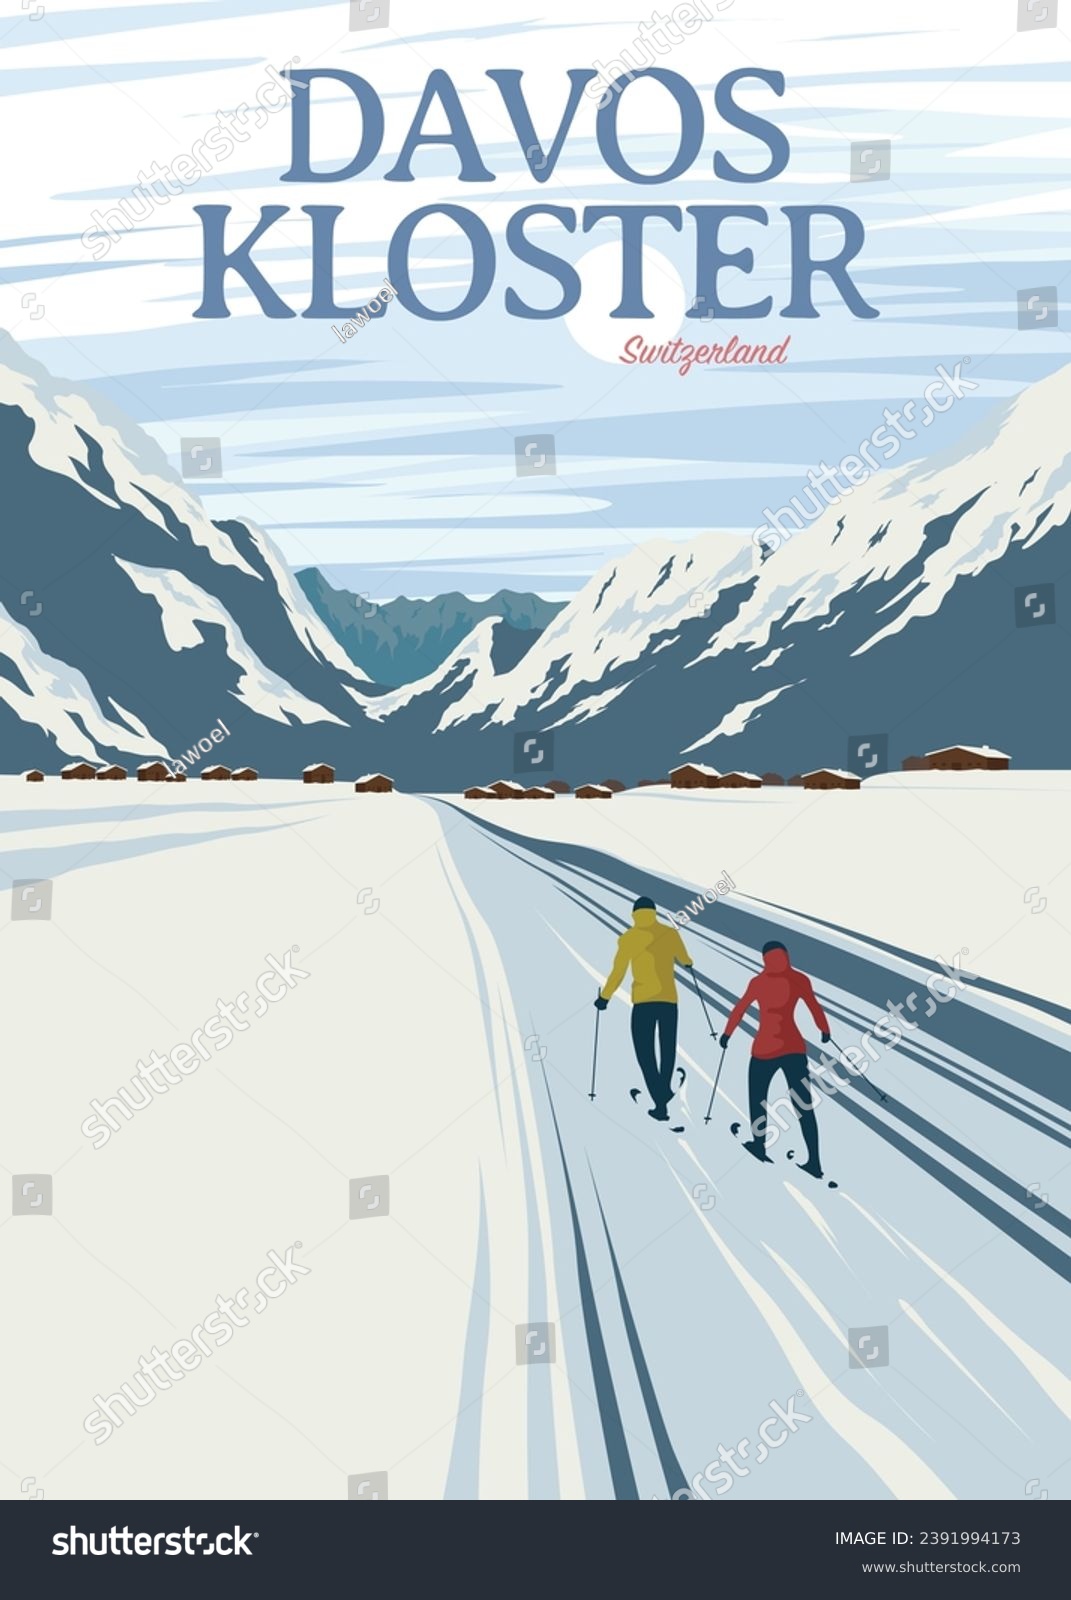 SVG of scenery of winter with couple skiing in davos kloster poster, switzerland travel poster vintage illustration design svg